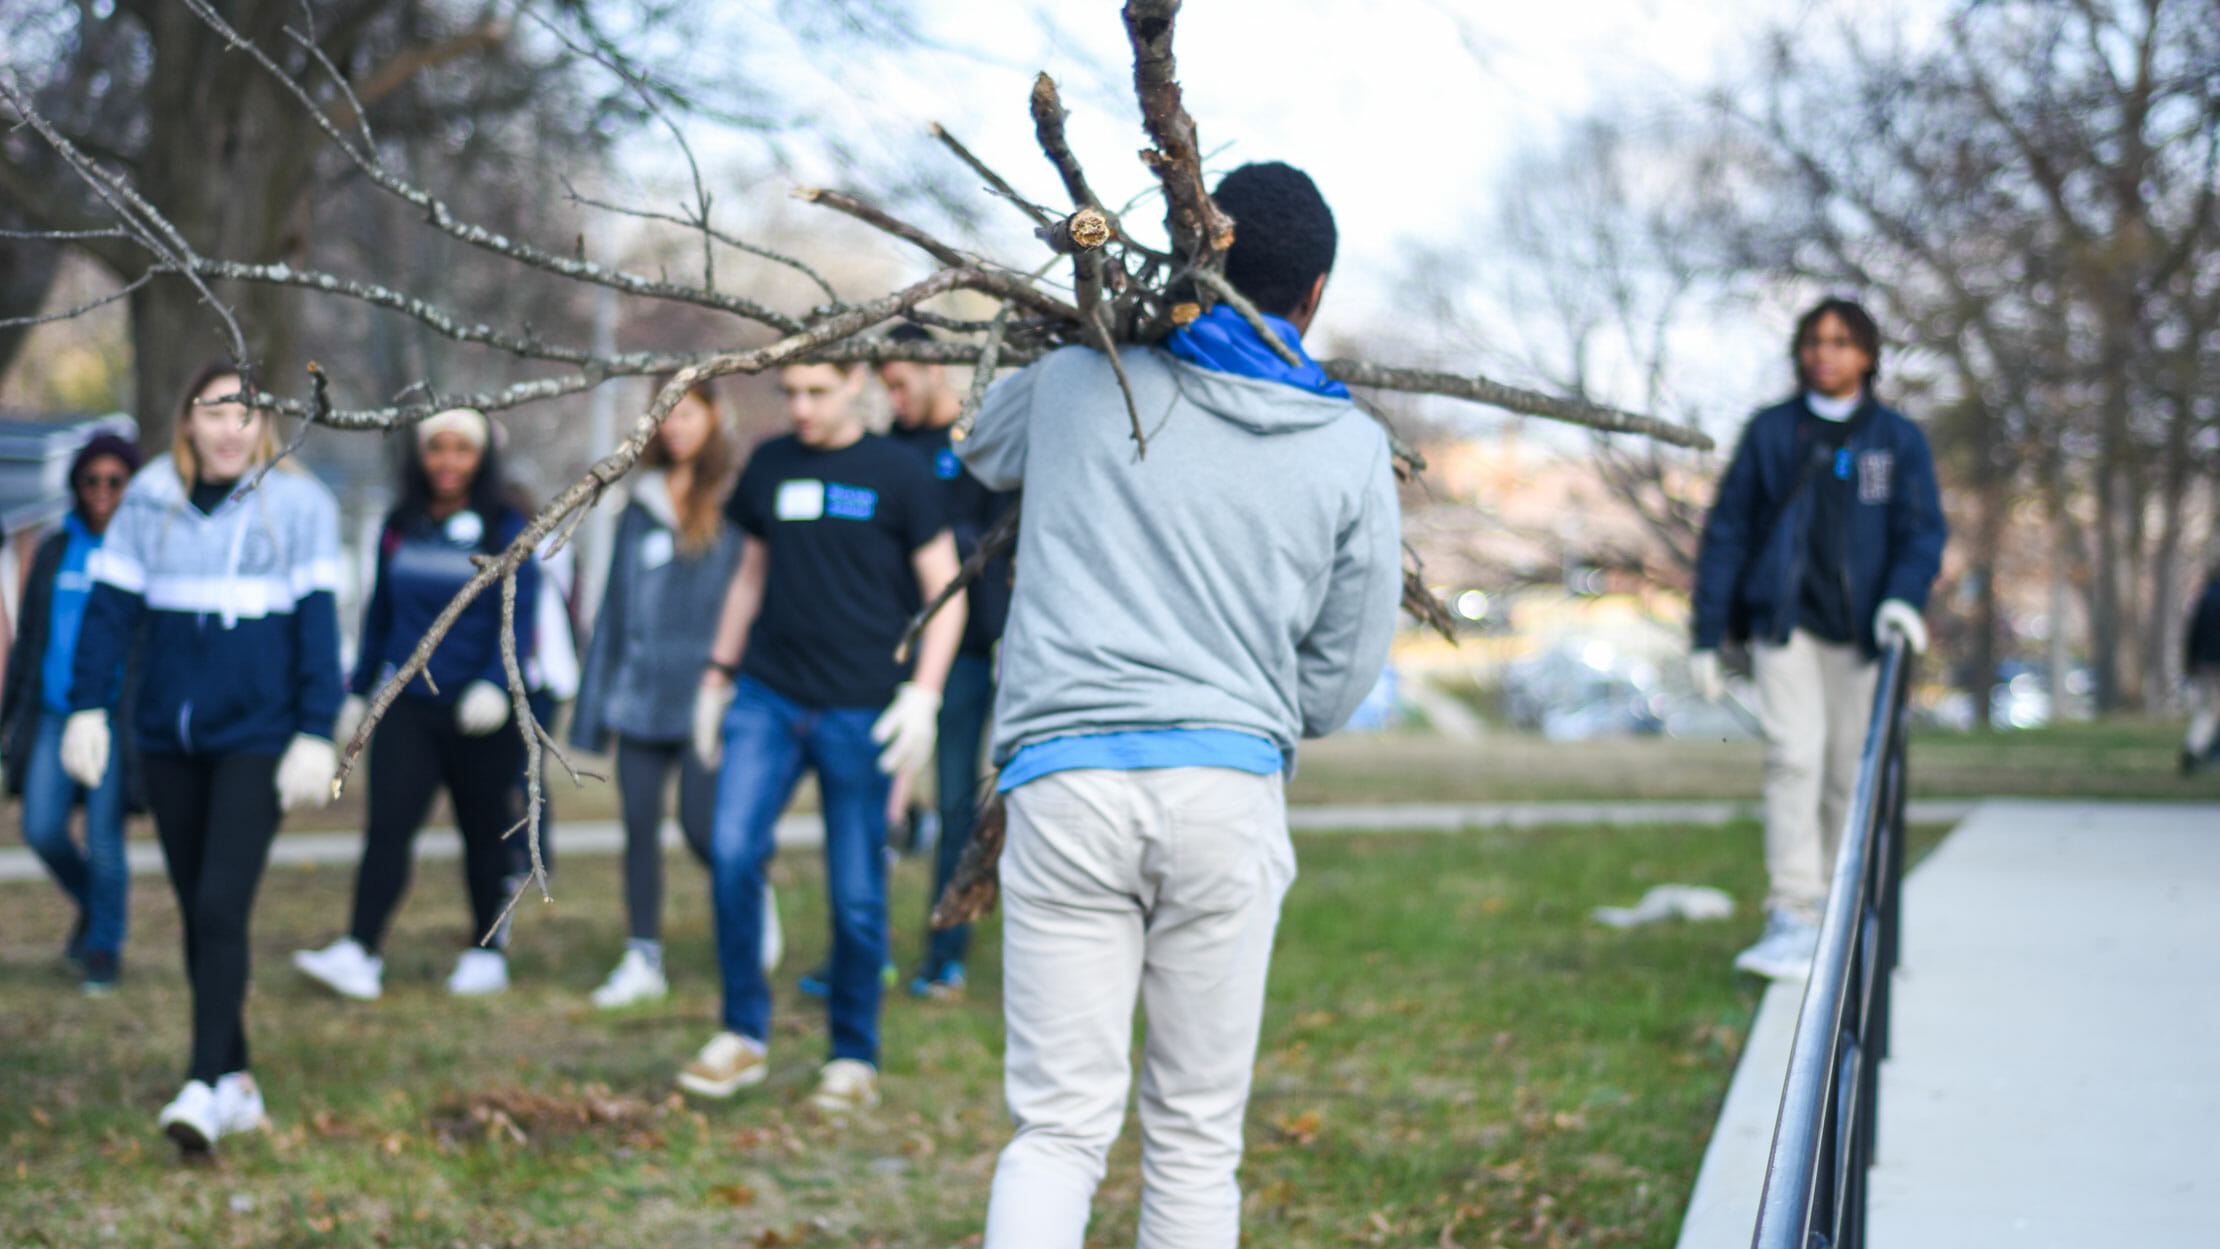 Student carries branches over shoulder